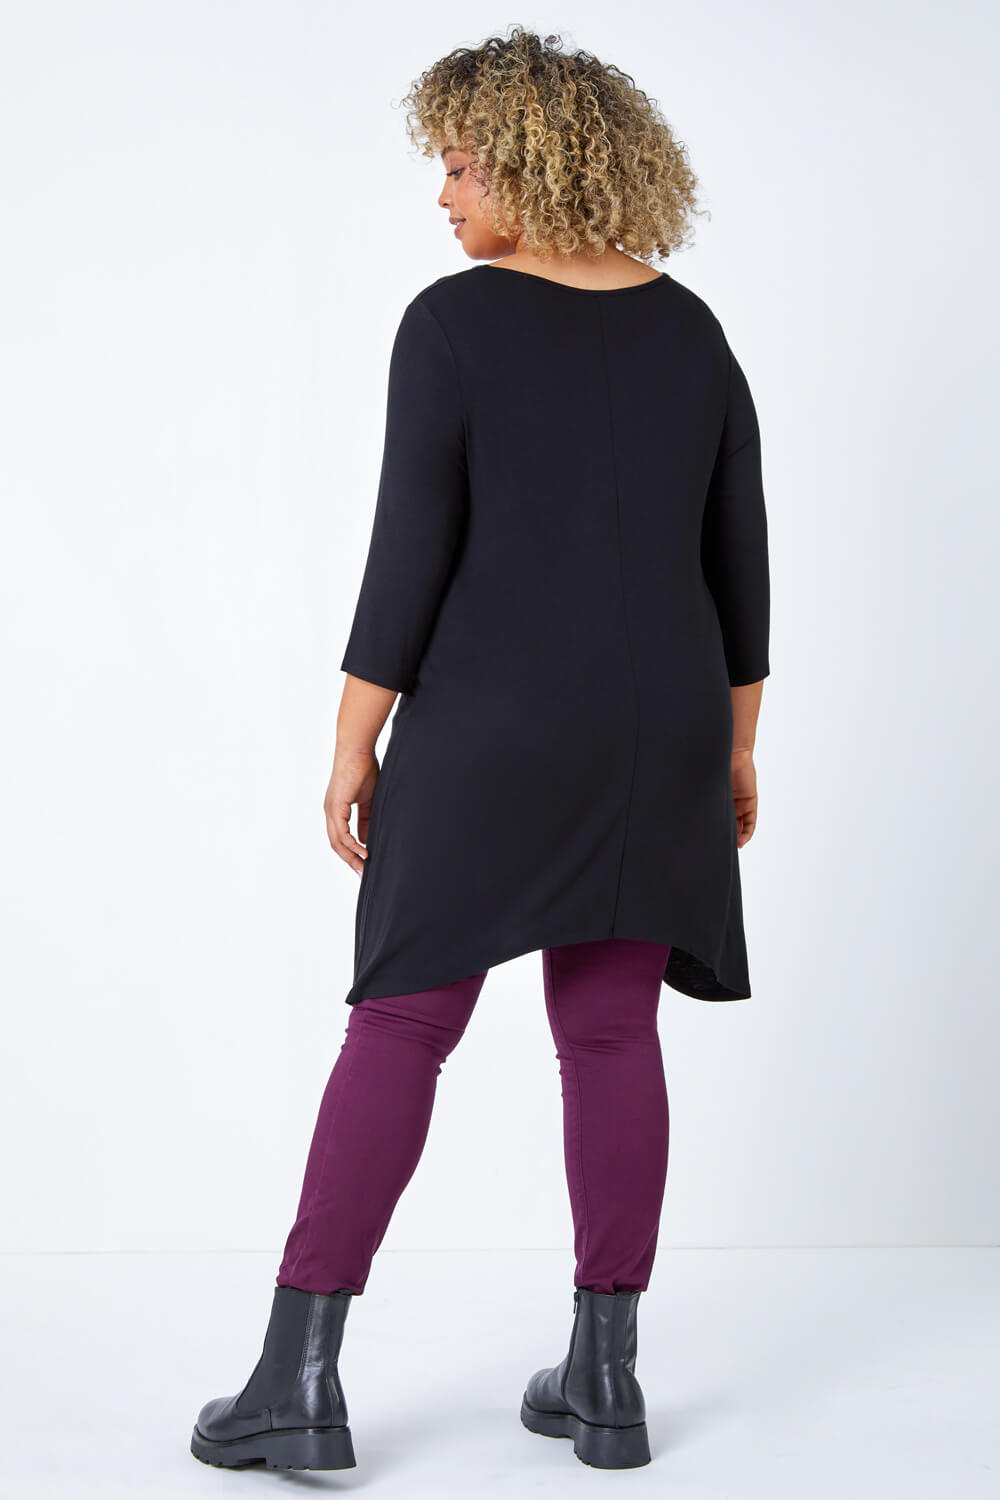 Black Curve Pocket Detail Stretch Tunic Top, Image 3 of 5